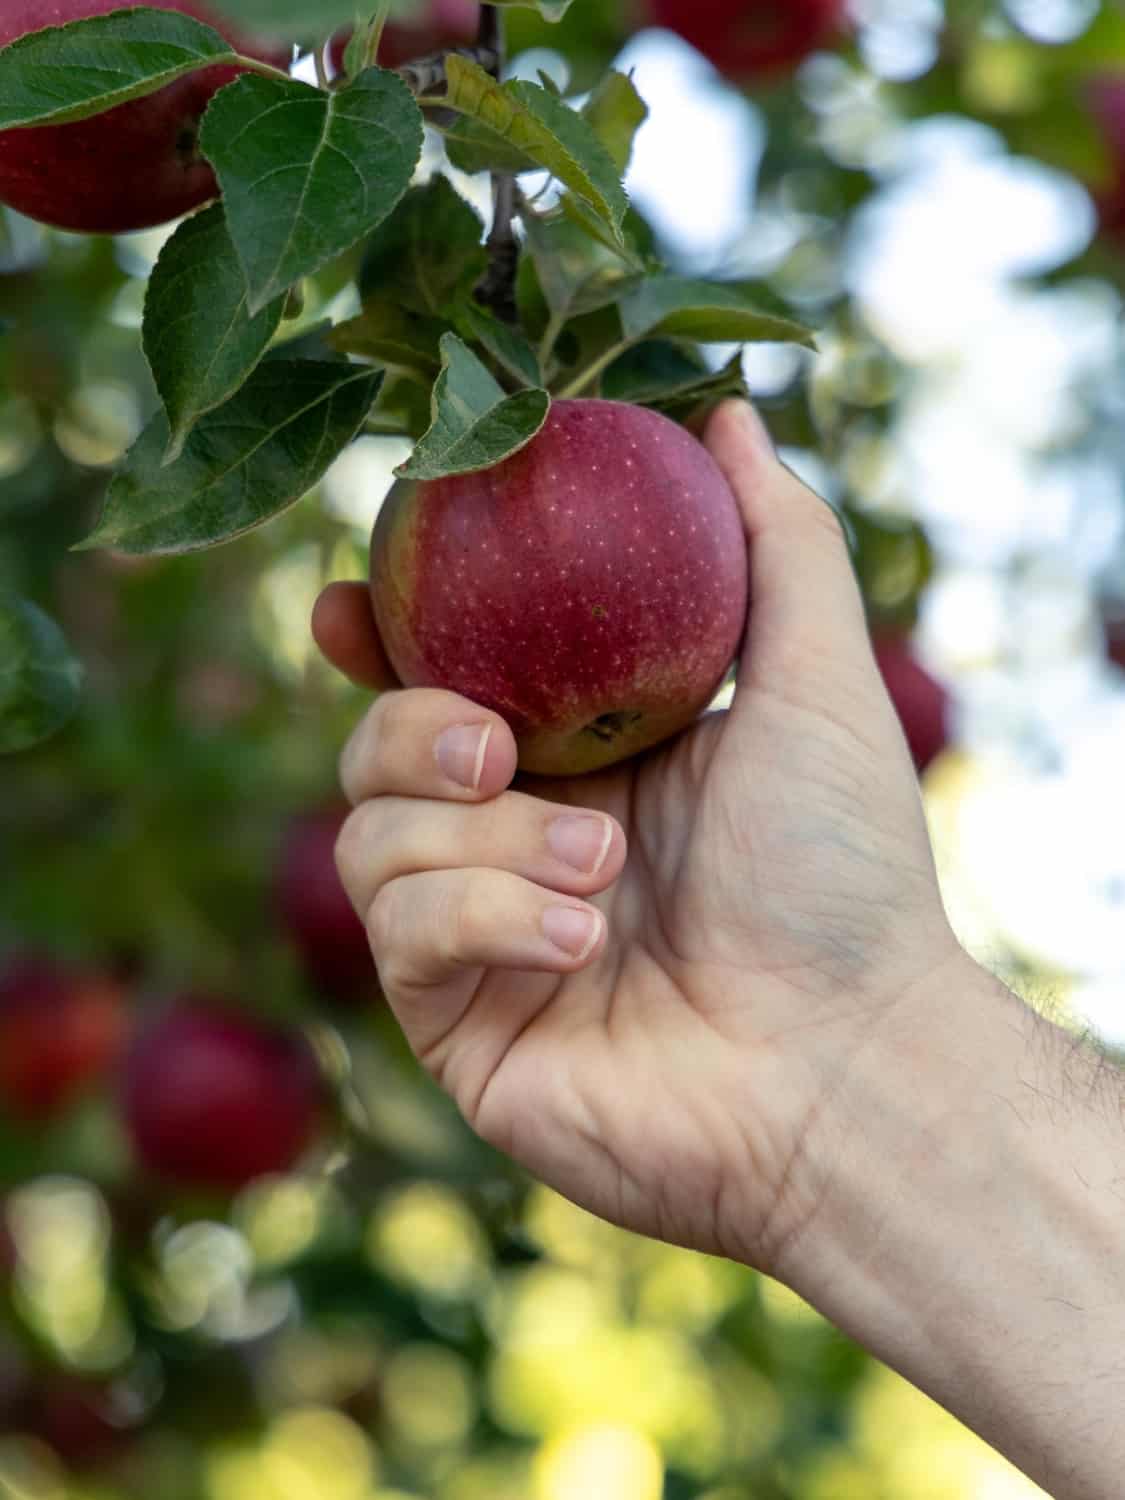 hand reaching to pull an apple from the tree